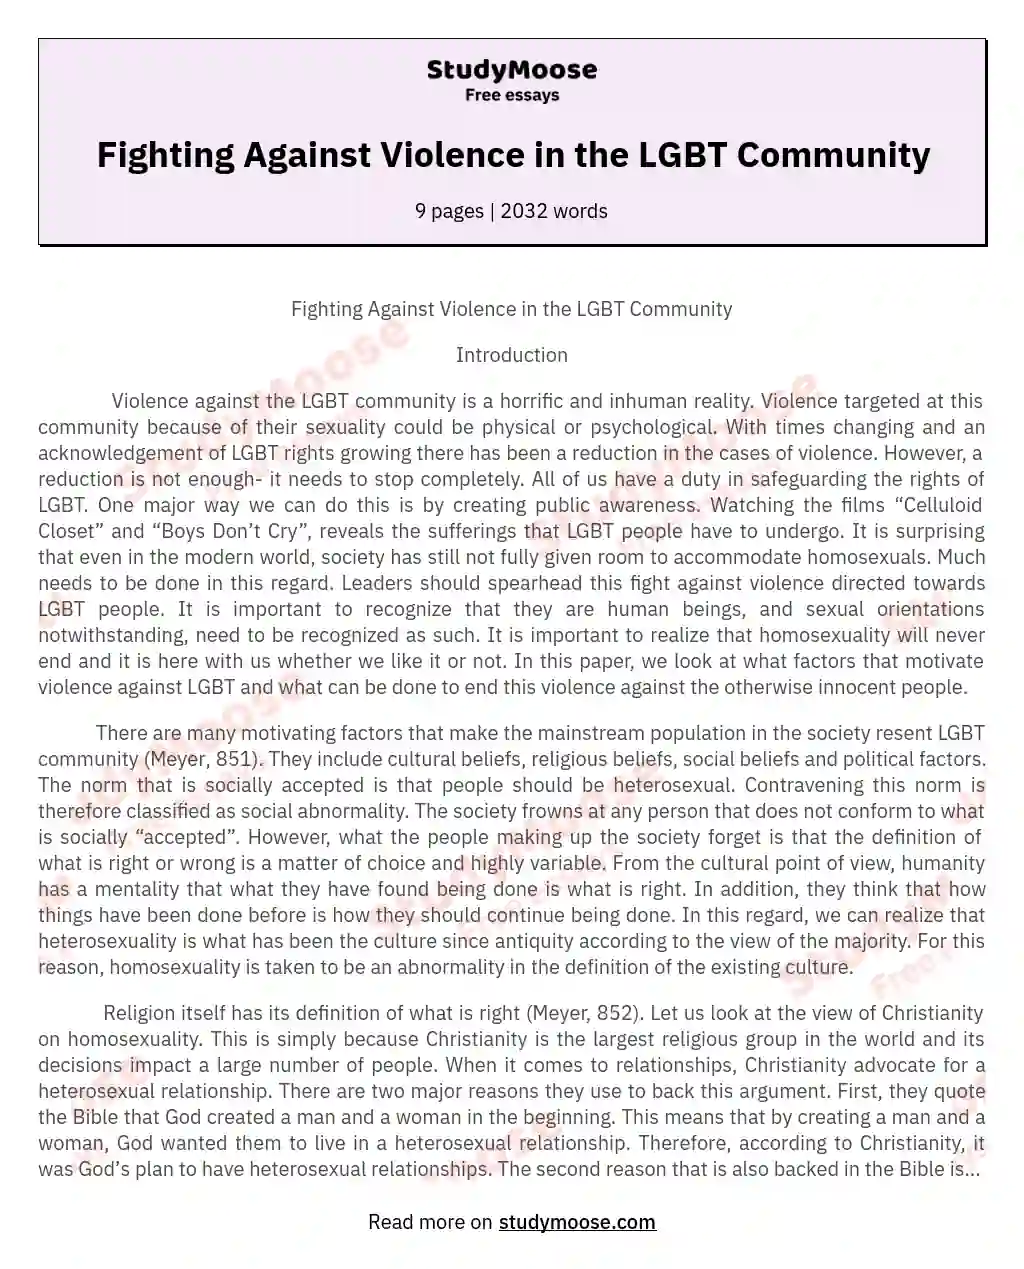 Fighting Against Violence in the LGBT Community essay